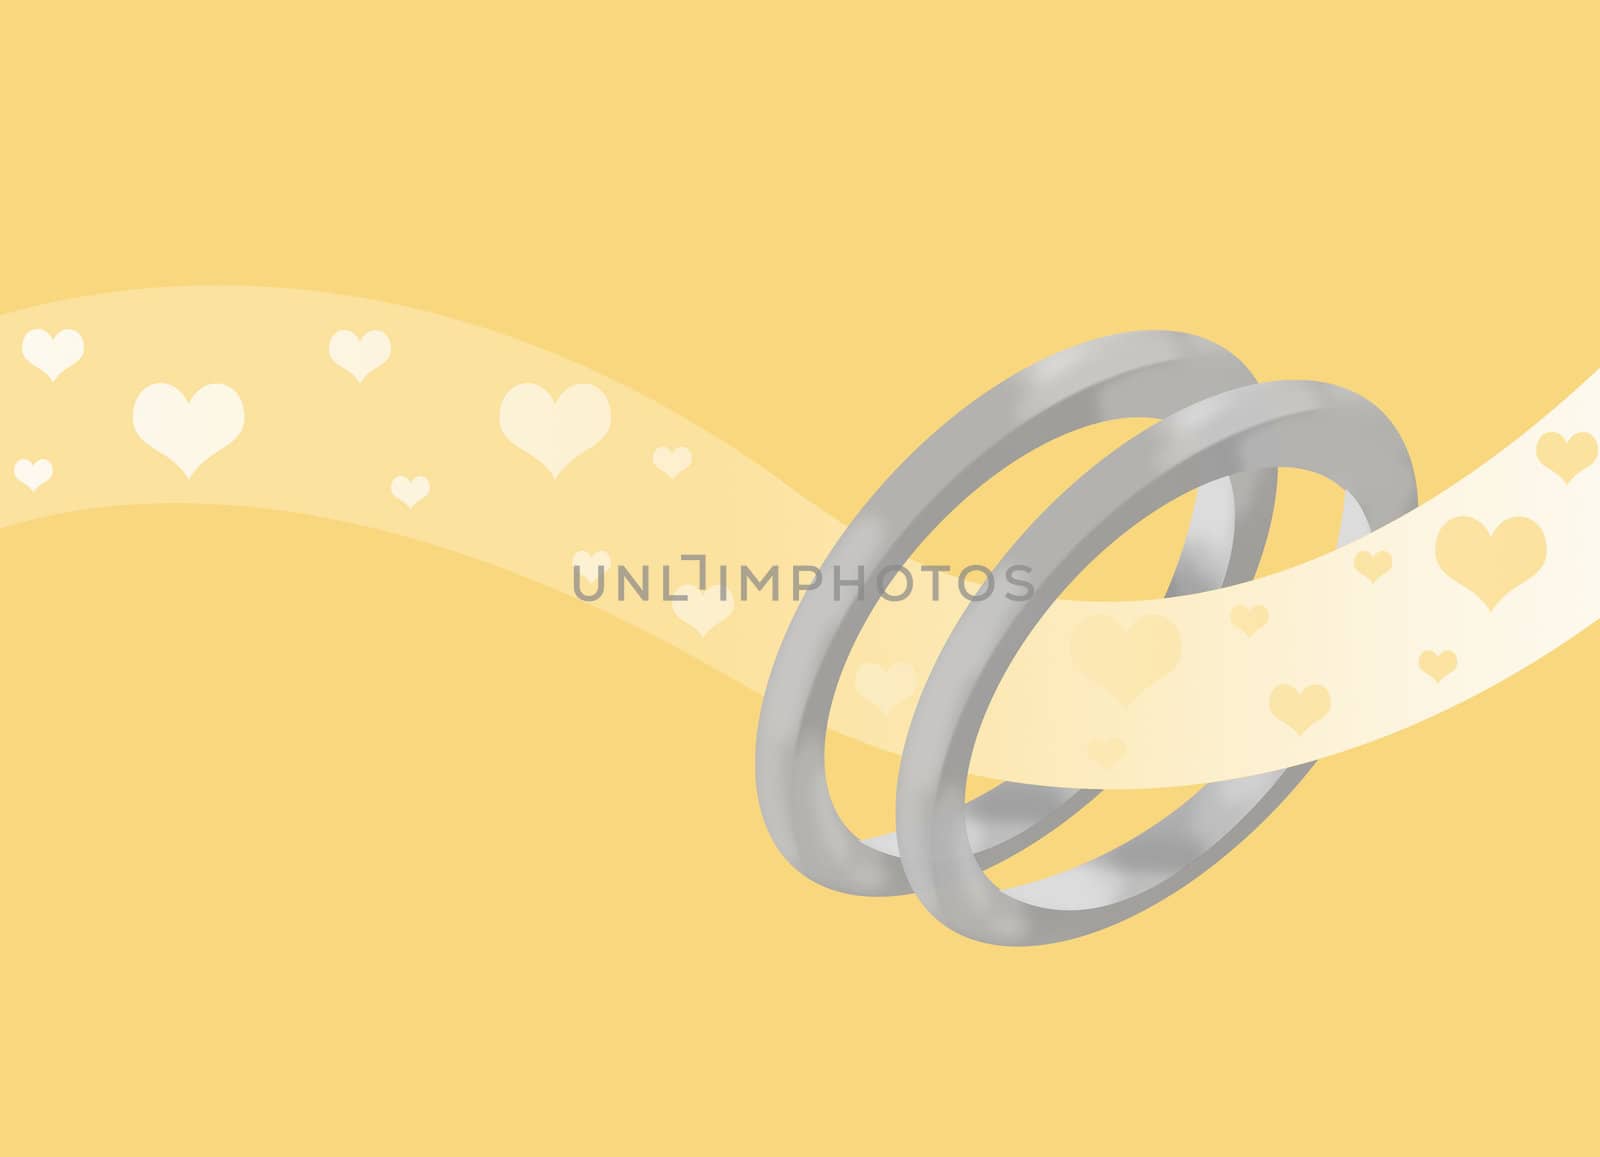 Two wedding rings on light orange background with a light swoosh with hearts